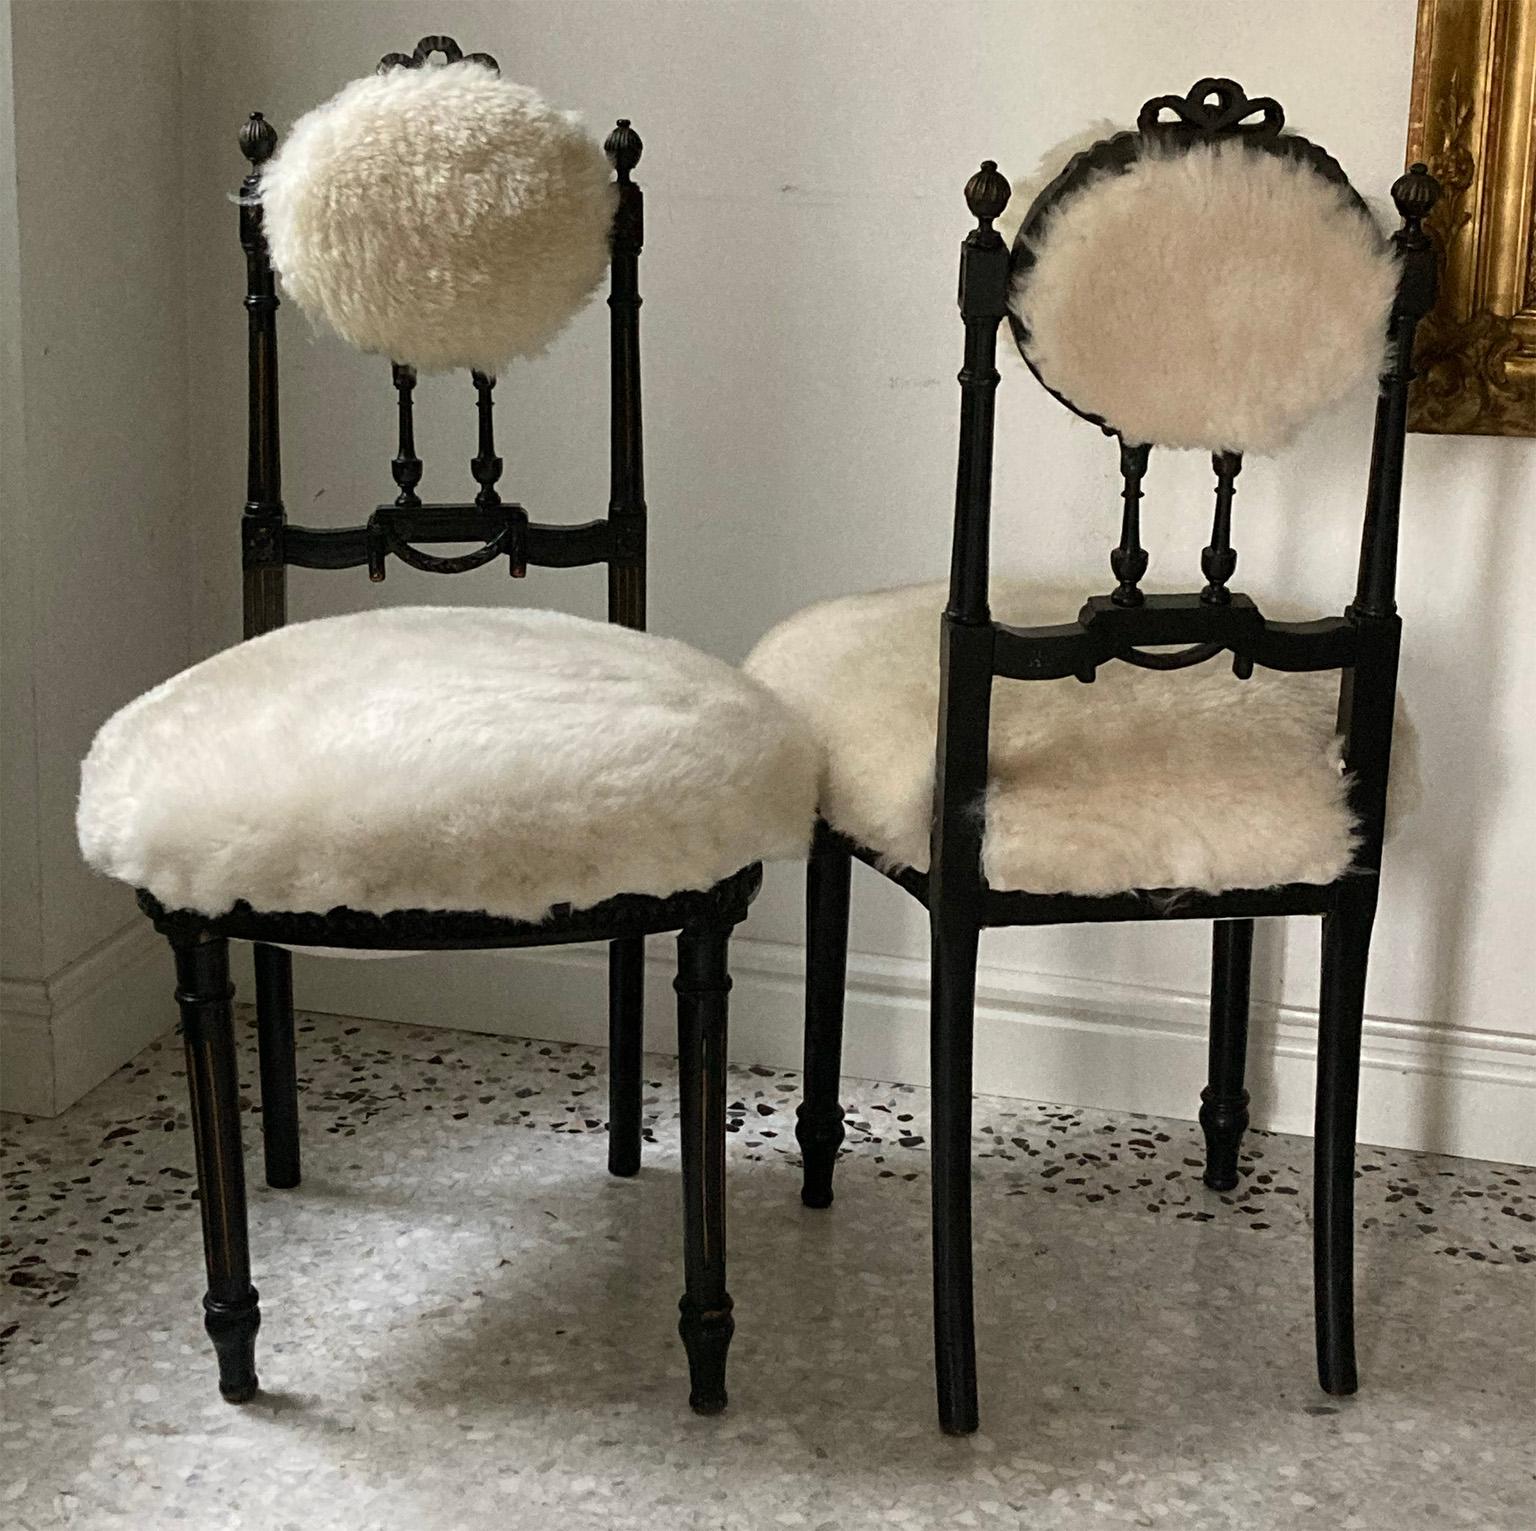 Fine Pair of Decorative Black Chairs with White Pure Wool , Sicily Italy 1920’s For Sale 3